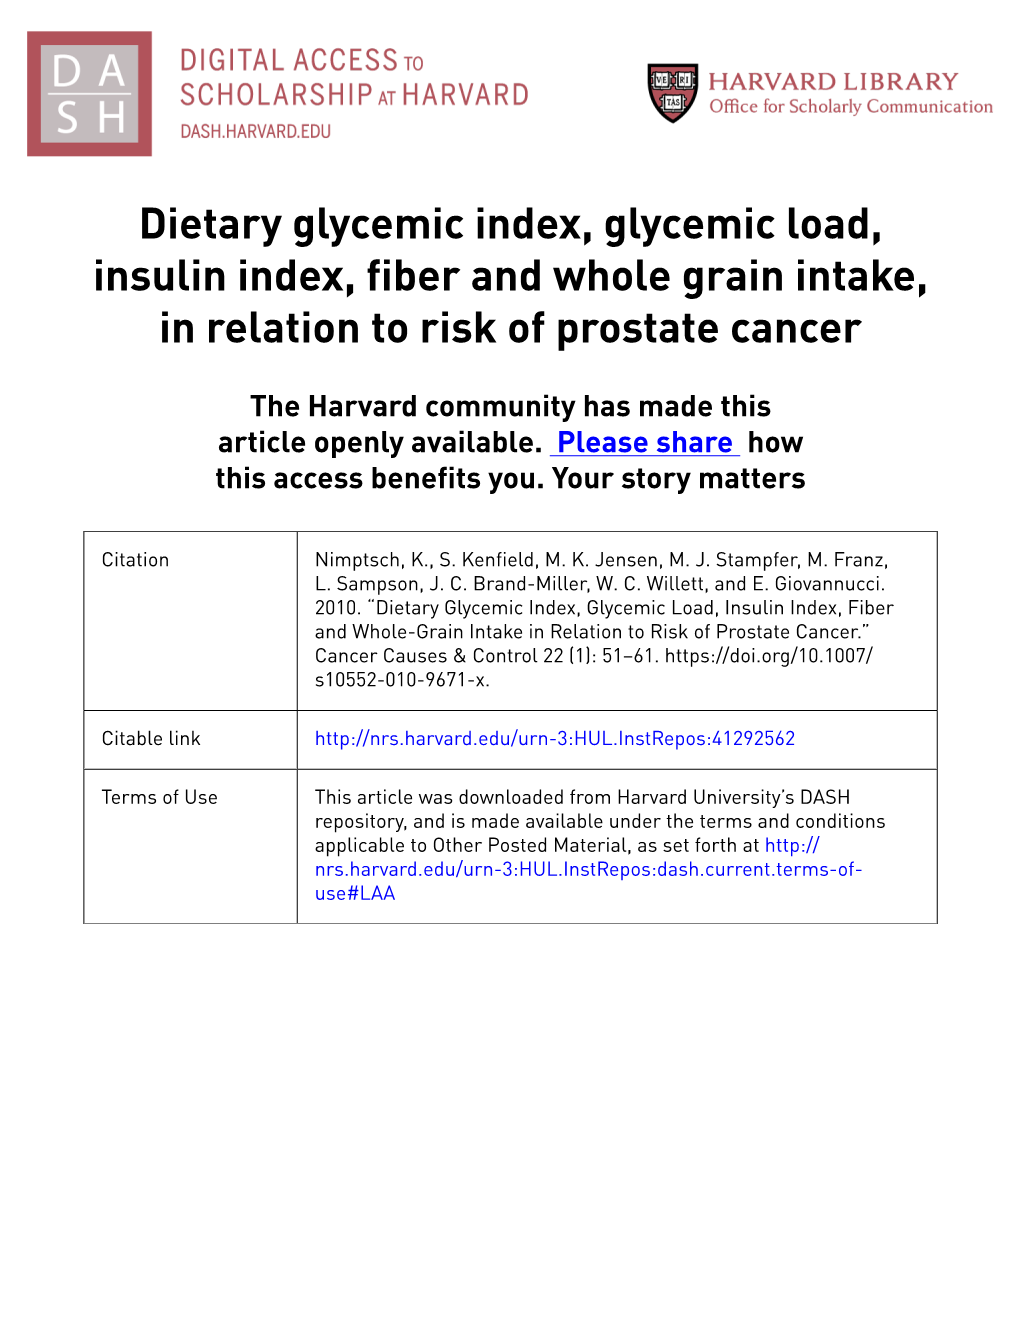 Dietary Glycemic Index, Glycemic Load, Insulin Index, Fiber and Whole Grain Intake, in Relation to Risk of Prostate Cancer